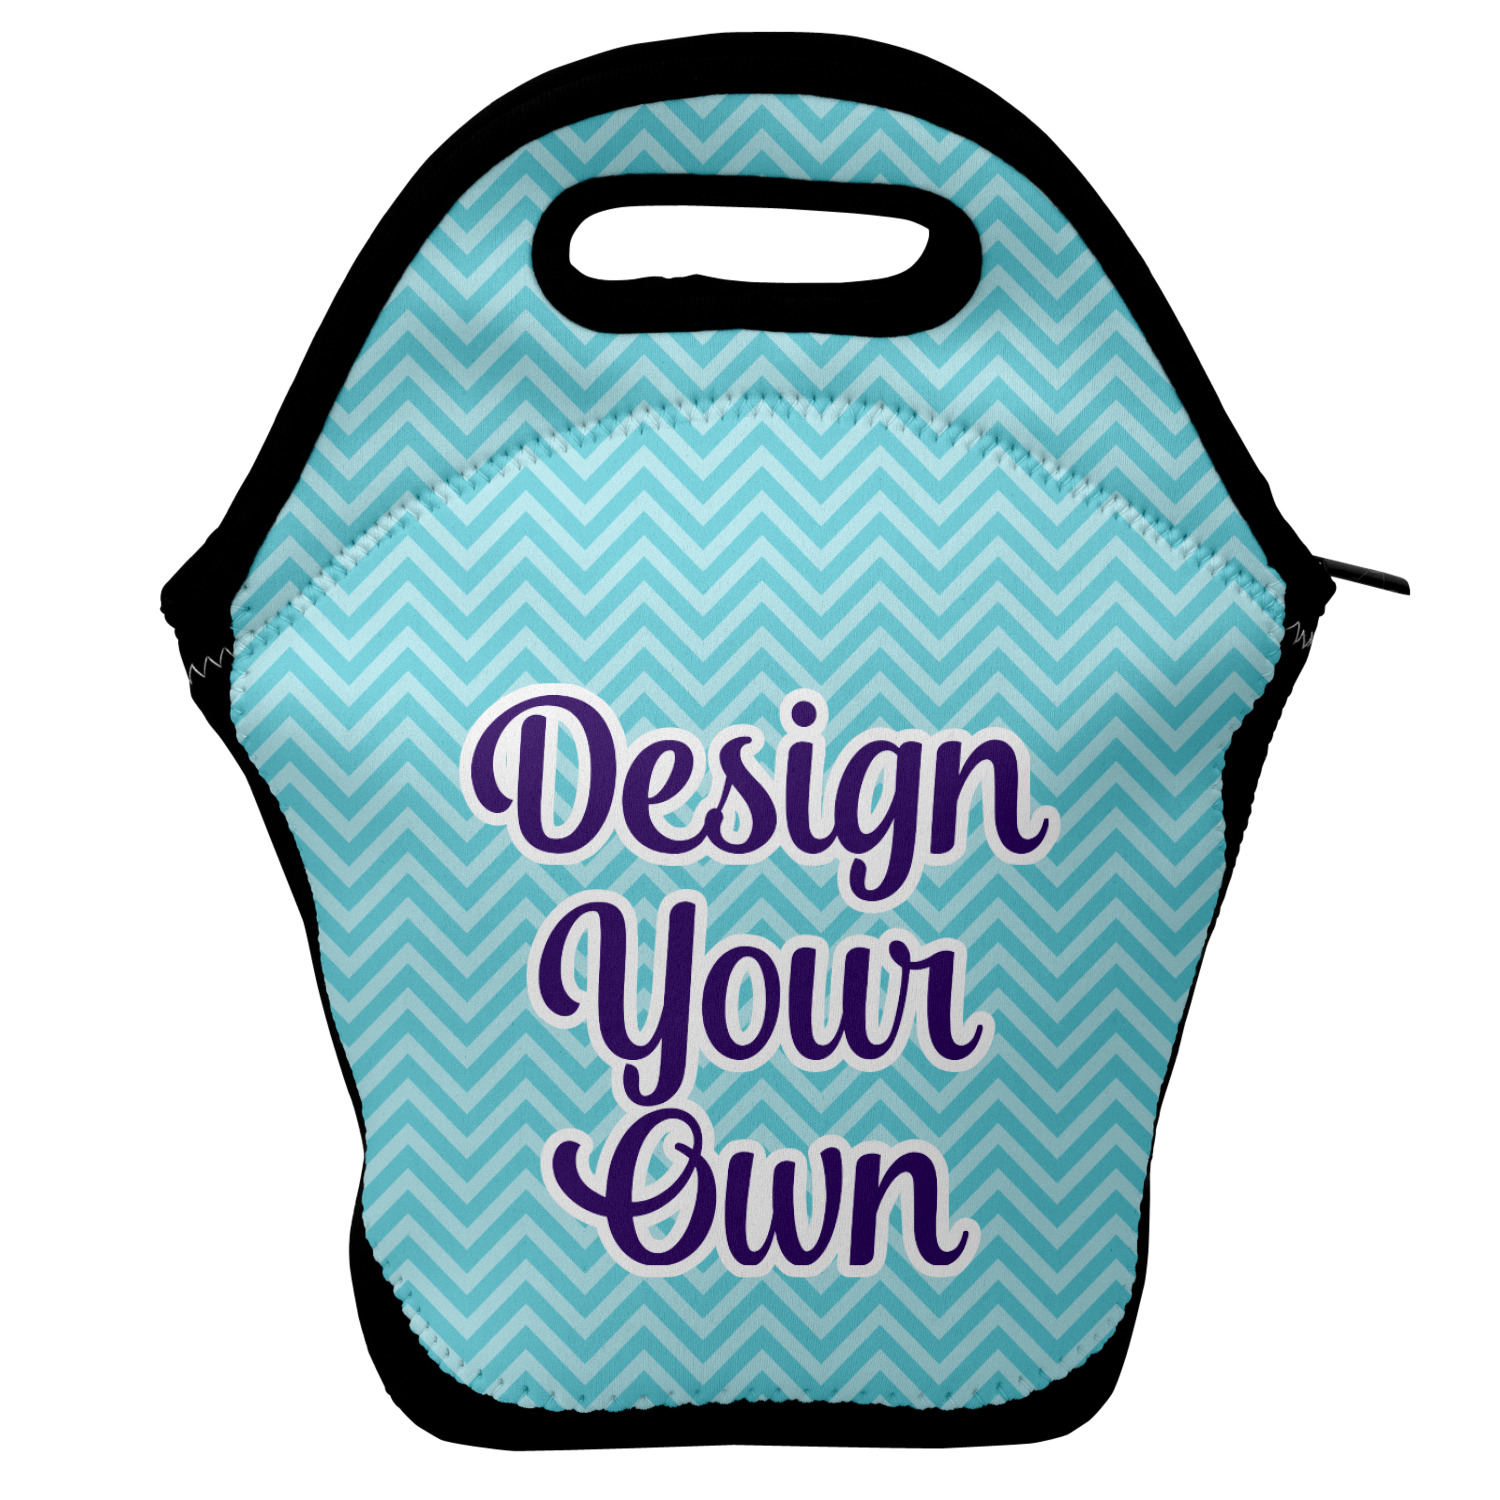 12 Designer Lunch Bags That Will Motivate You to Pack Your Own